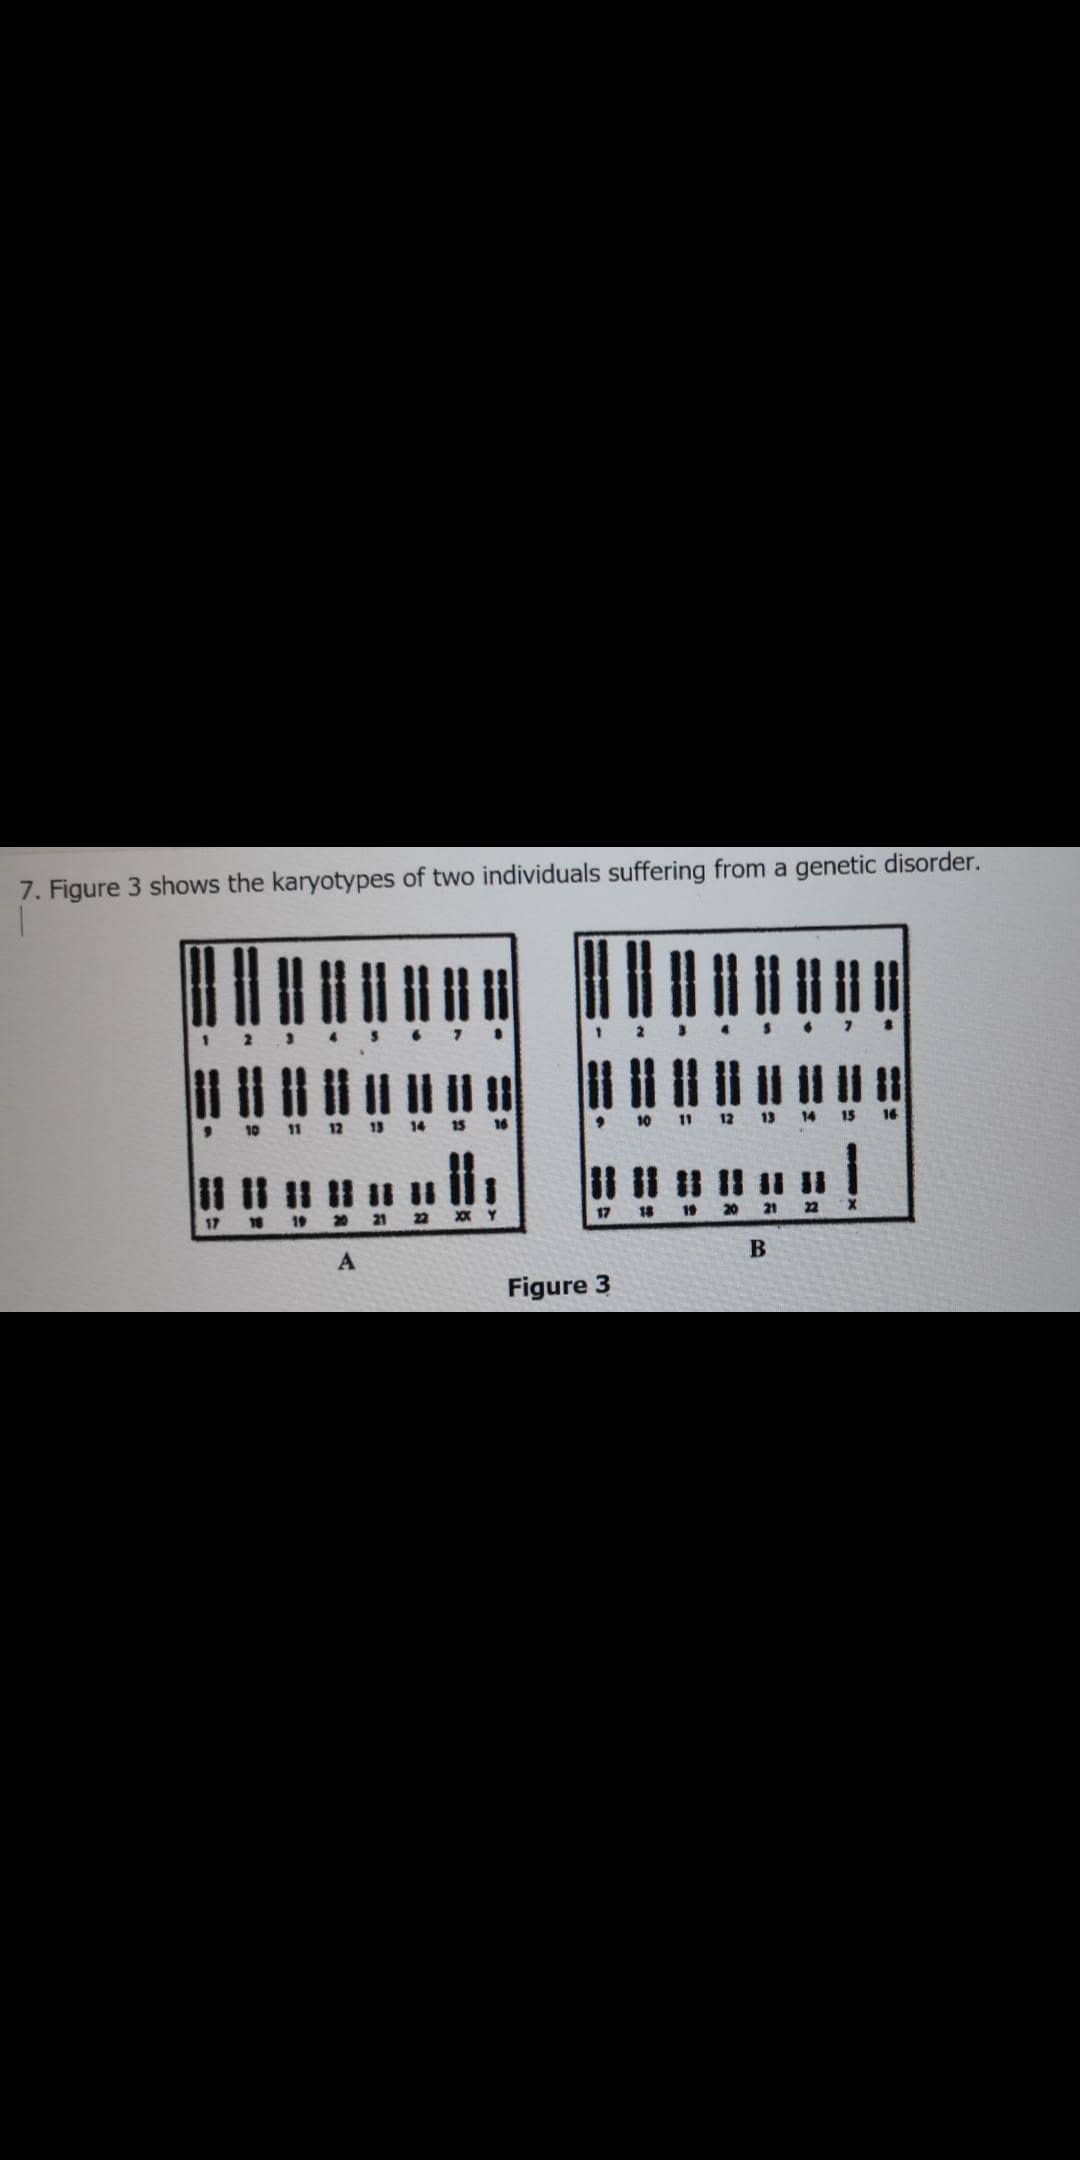 7. Figure 3 shows the karyotypes of two individuals suffering from a genetic disorder.
10 11 12
13 14
15
17
19
22
XX Y
17
18
19
Figure 3
